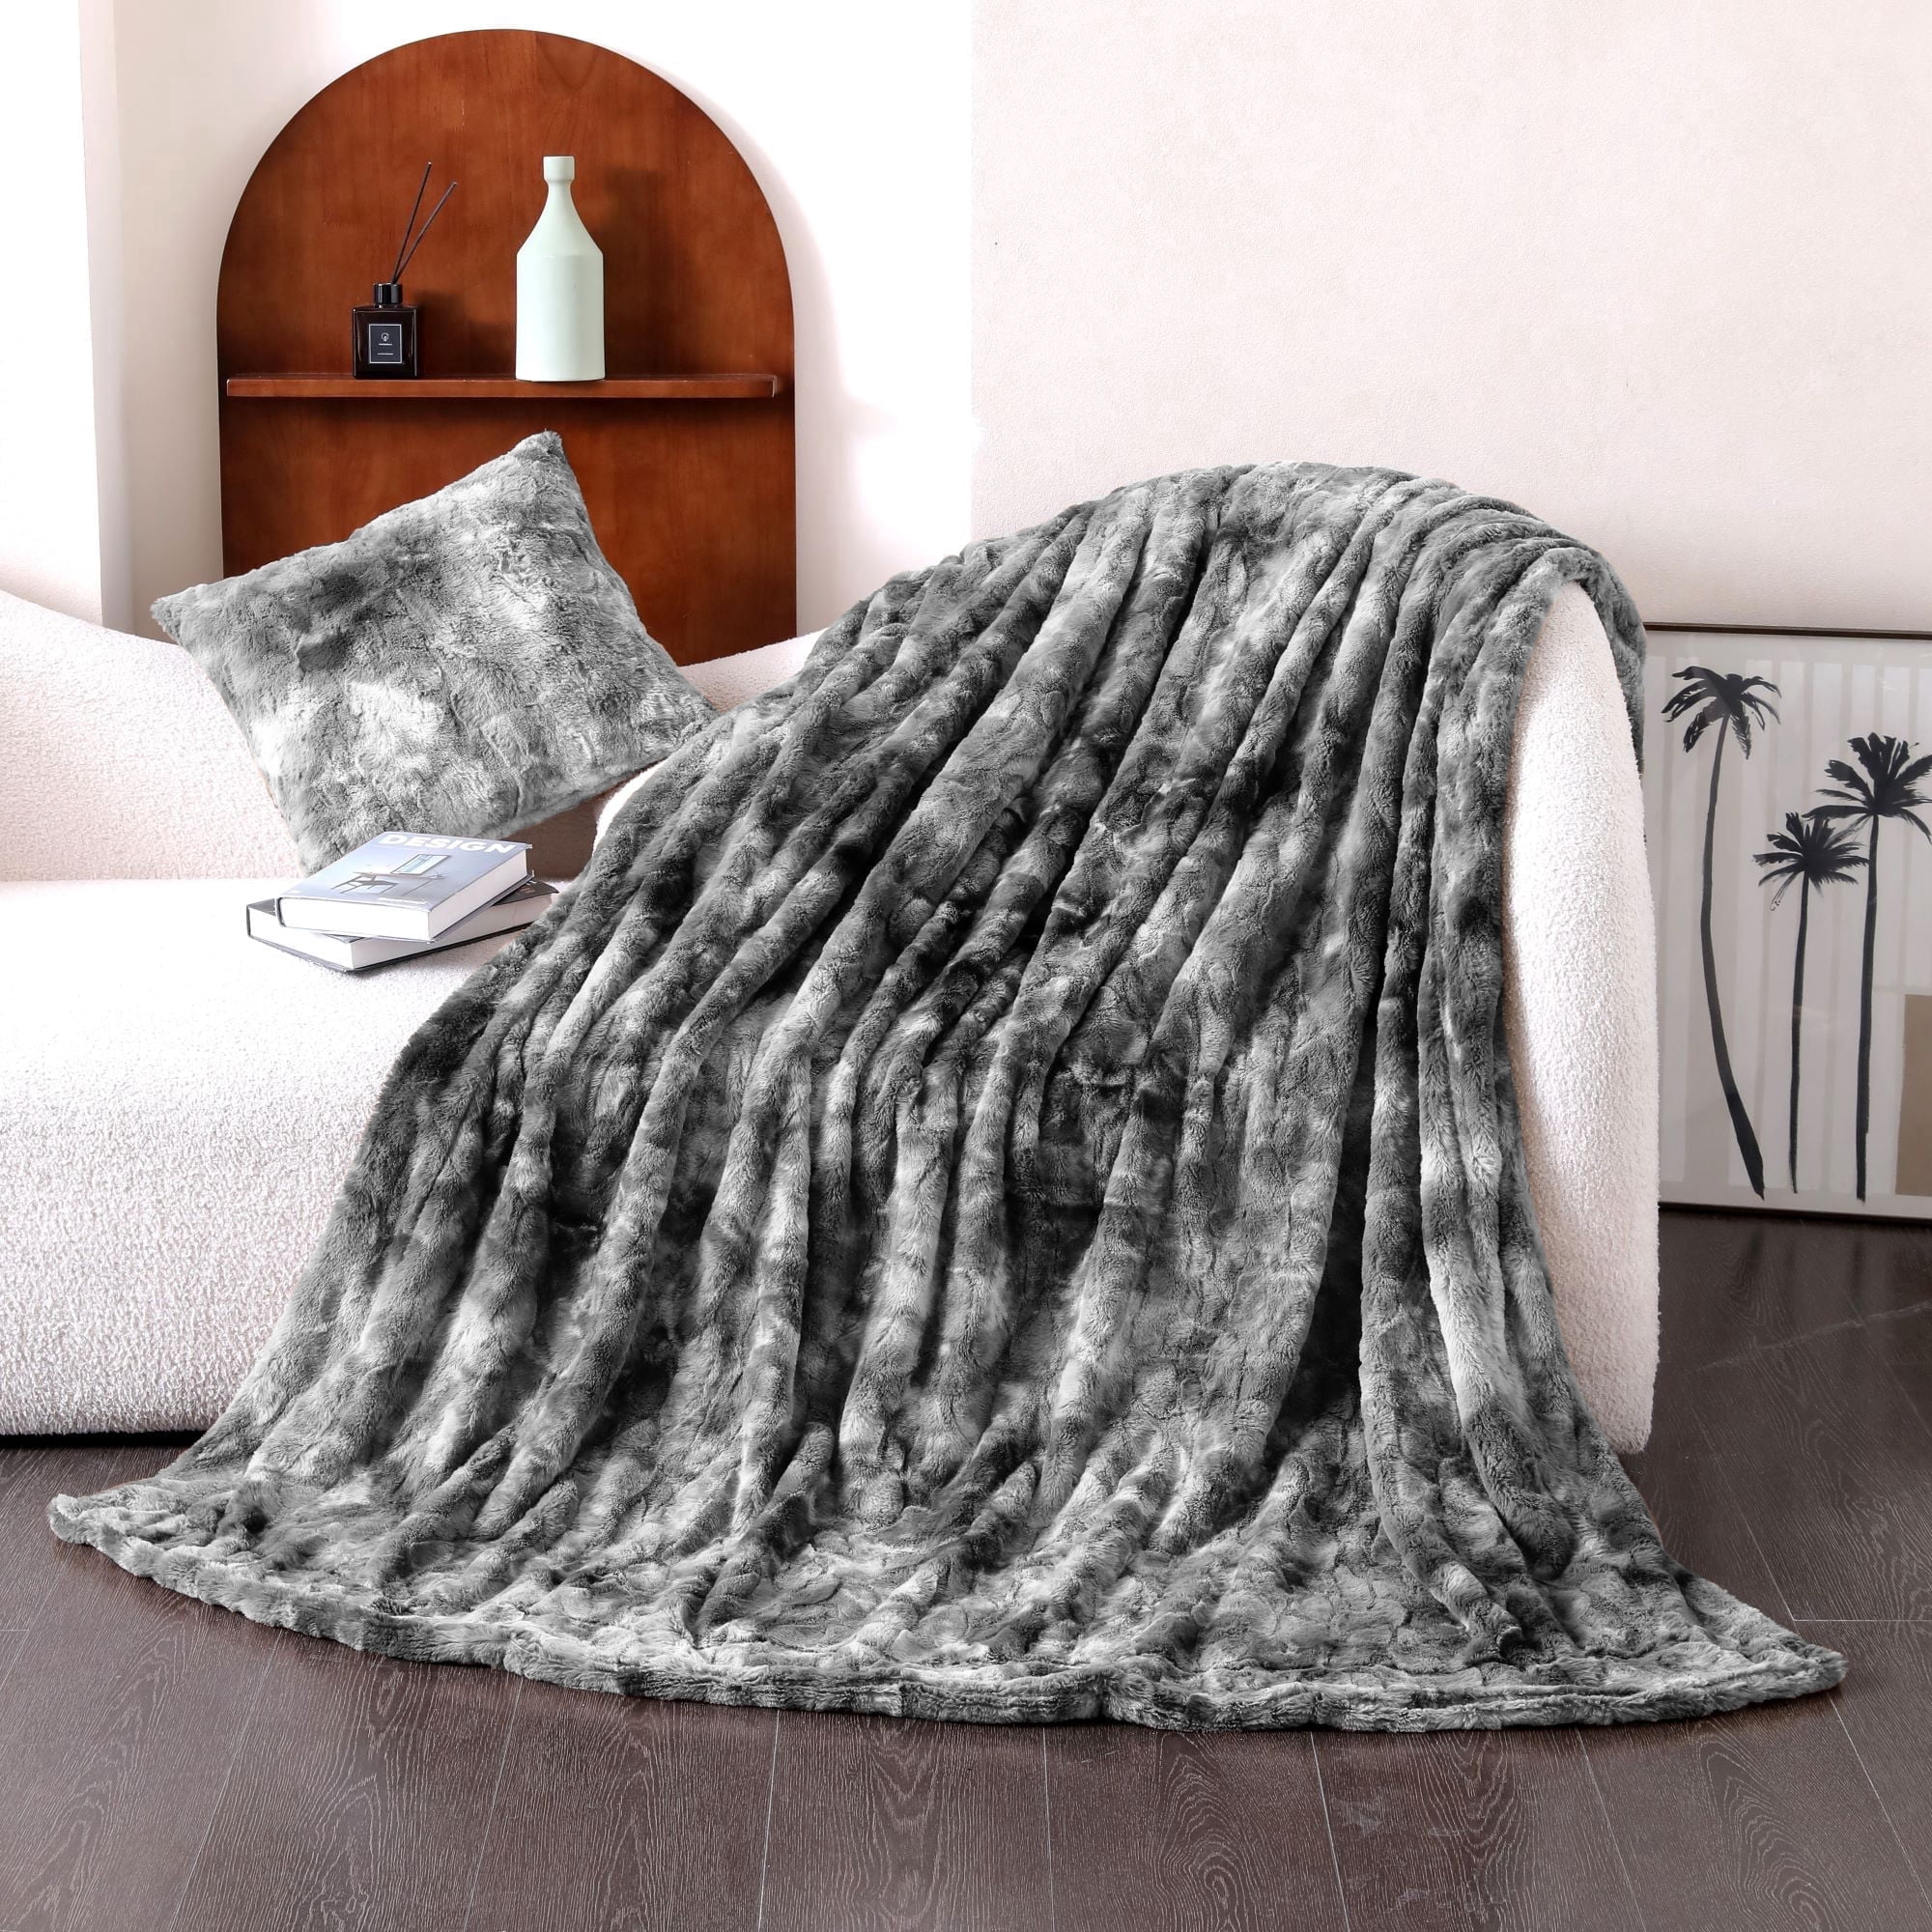 Sanmadrola 60''X 80'' Luxury Faux Fur Throw Blanket for Bed Extra Large  Super Soft Fluffy Cozy Fall Thick Warm Fox Fur Throw Blankets for Couch, Bed  Reversible to Plush Velvet Brown 